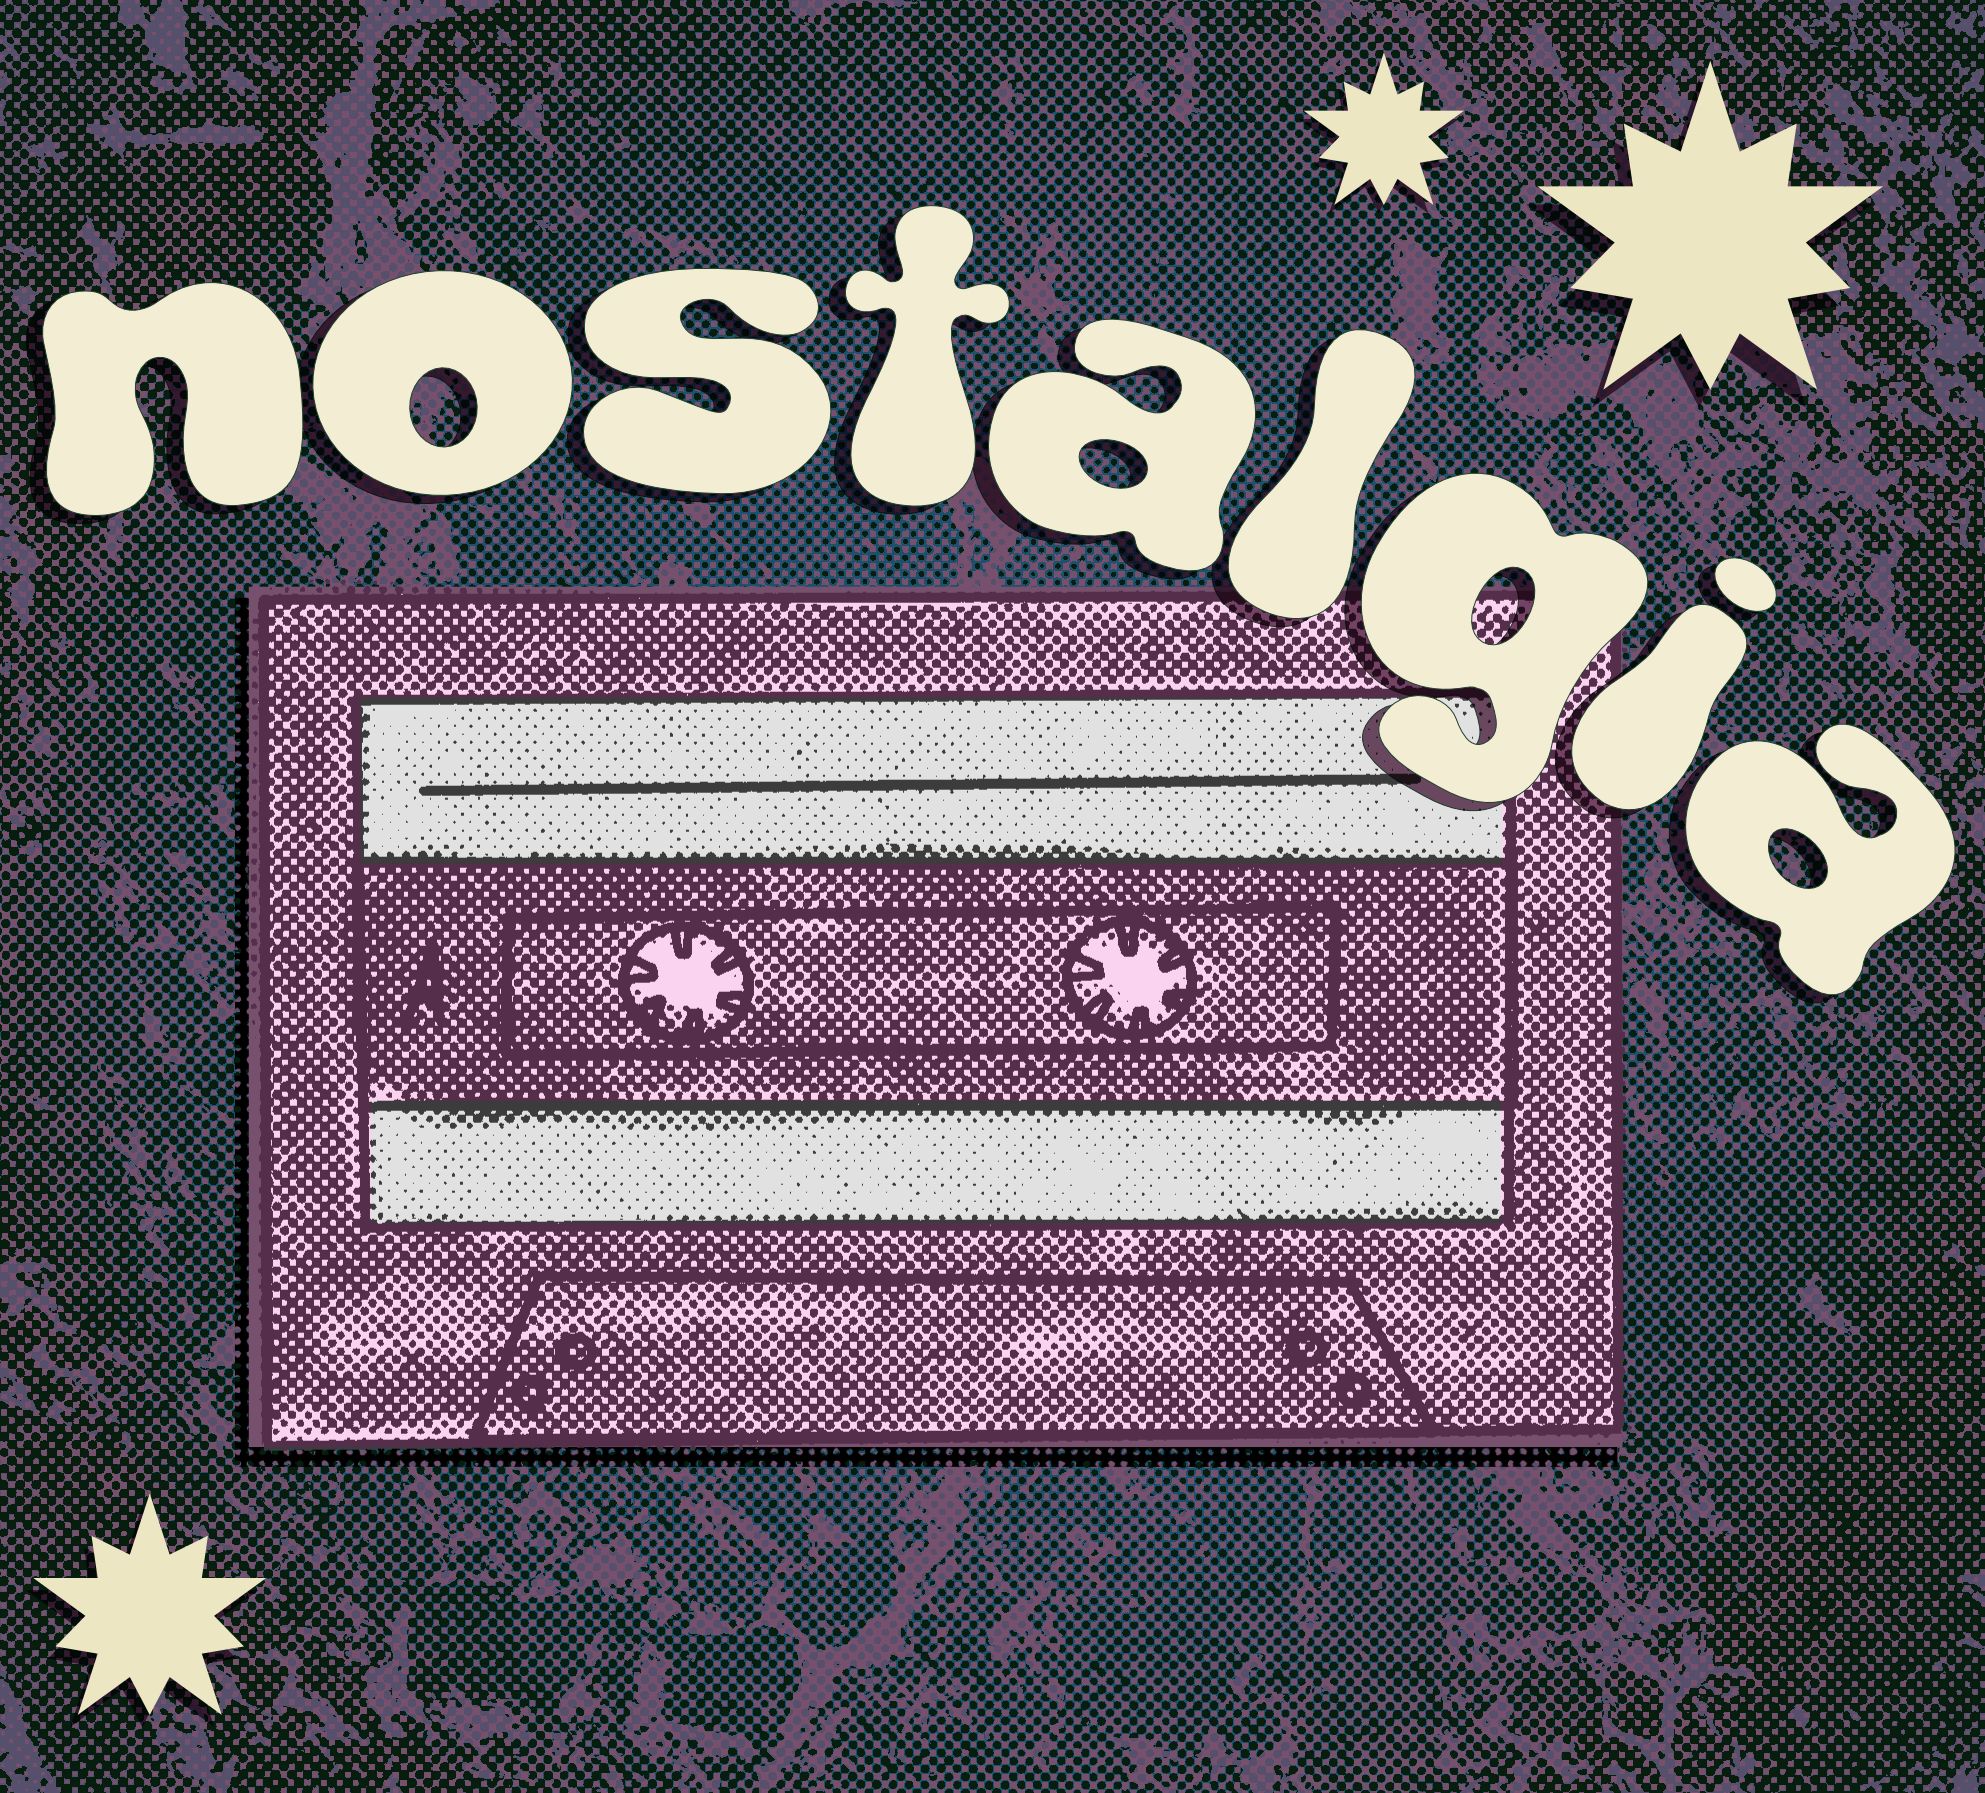 a purple halftone drawing of a cassette tape and the word "nostalgia"